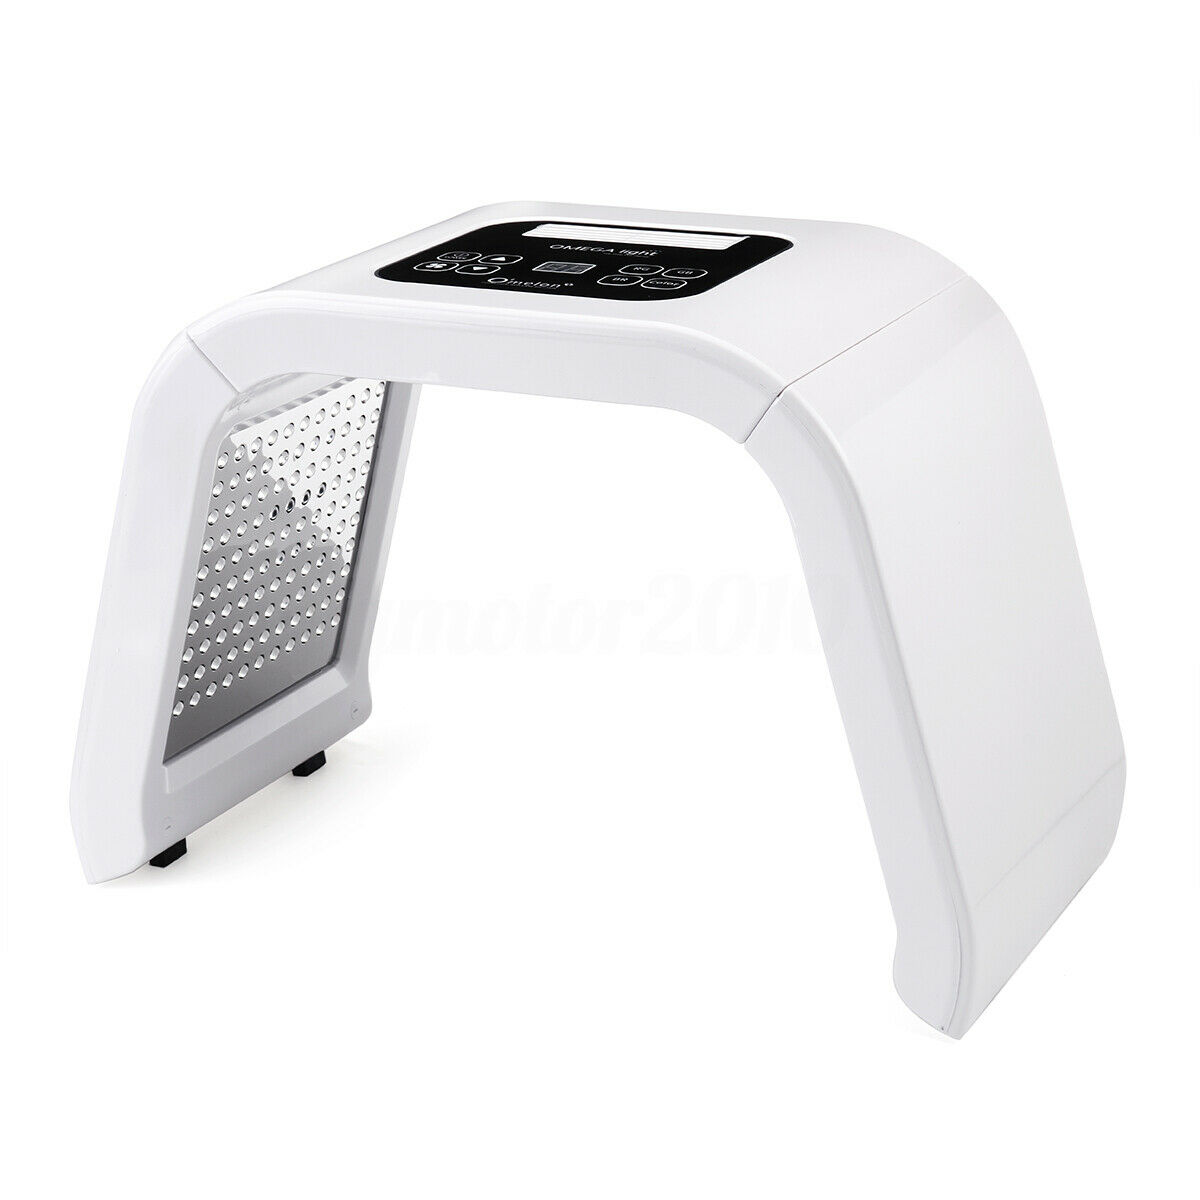 LED Light Therapy Facial Machine - Brody Massage